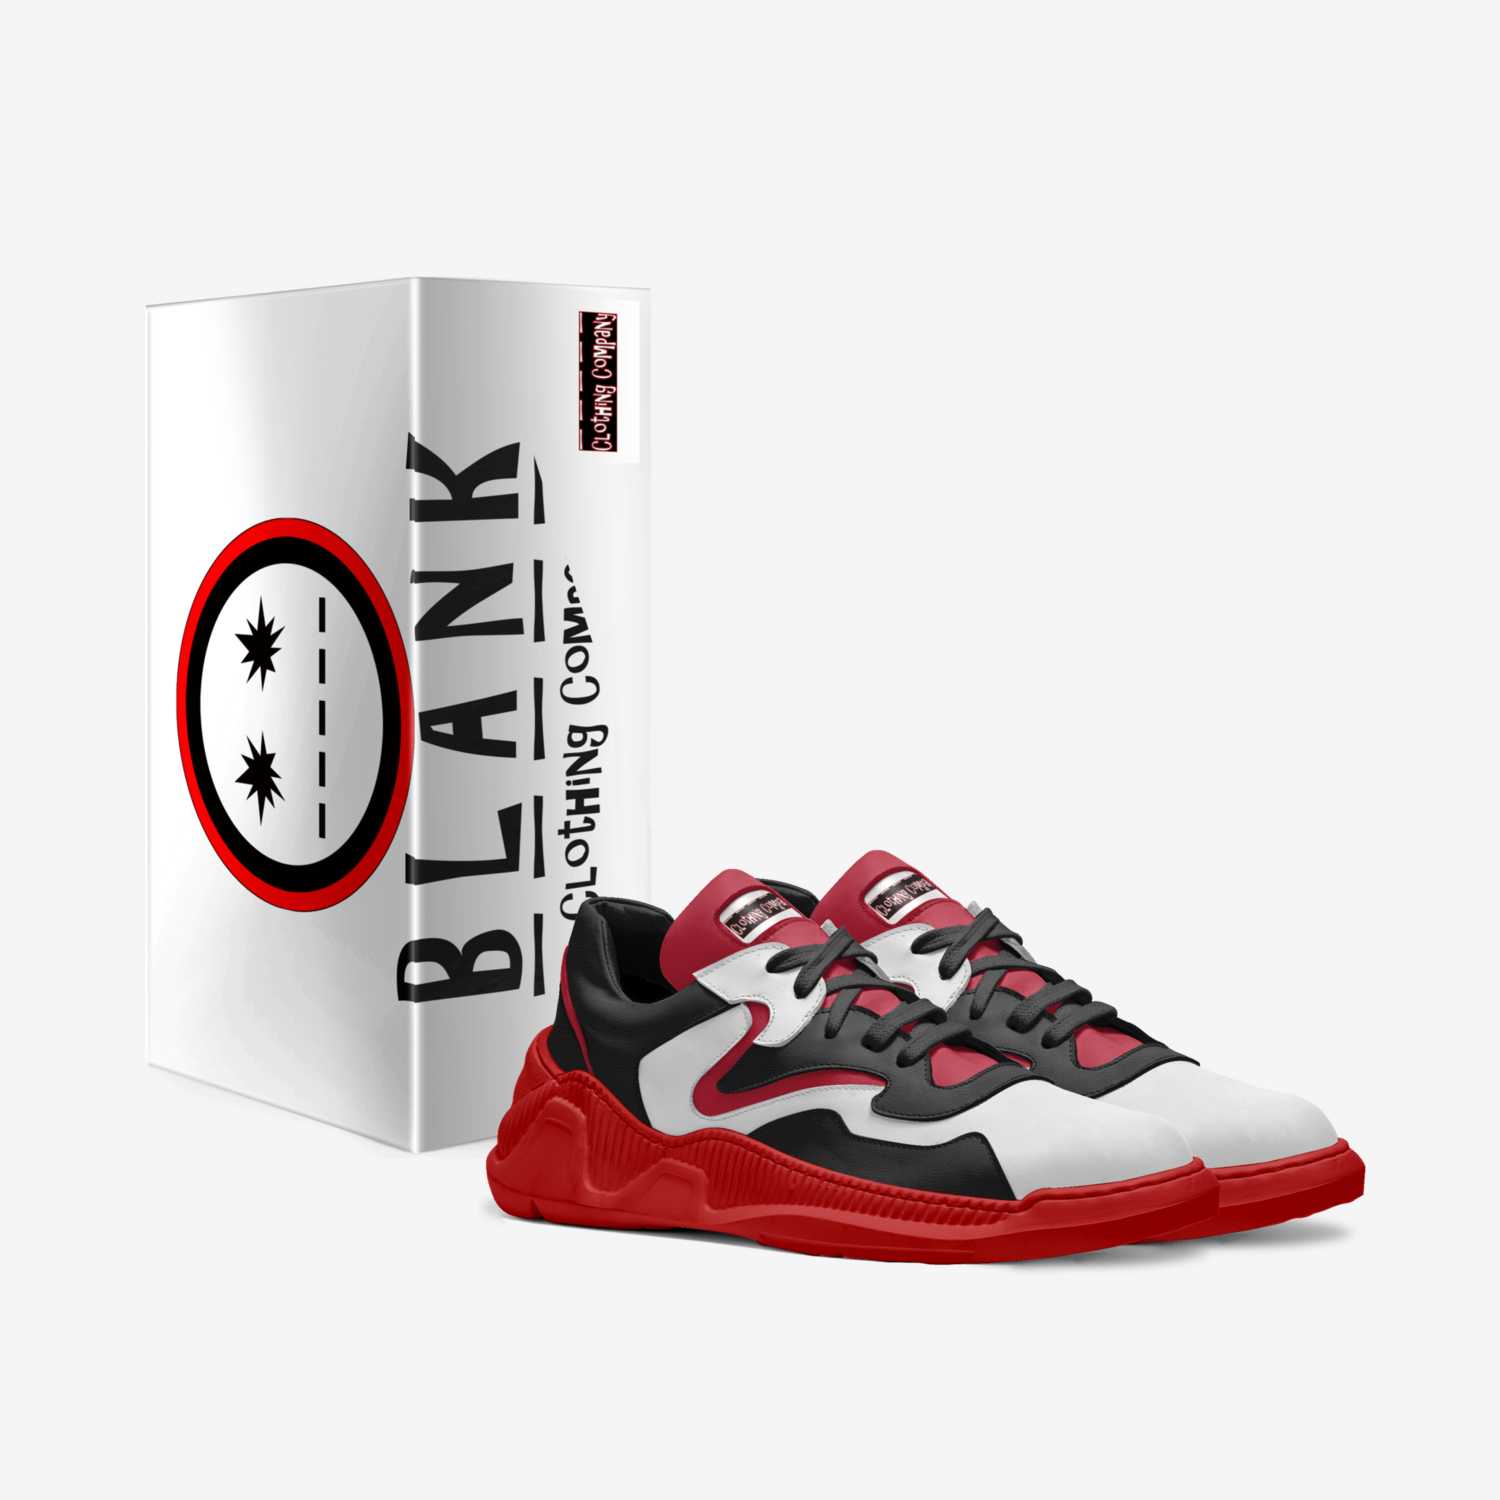 BLANK Classic Step custom made in Italy shoes by Blank Clothing Company | Box view